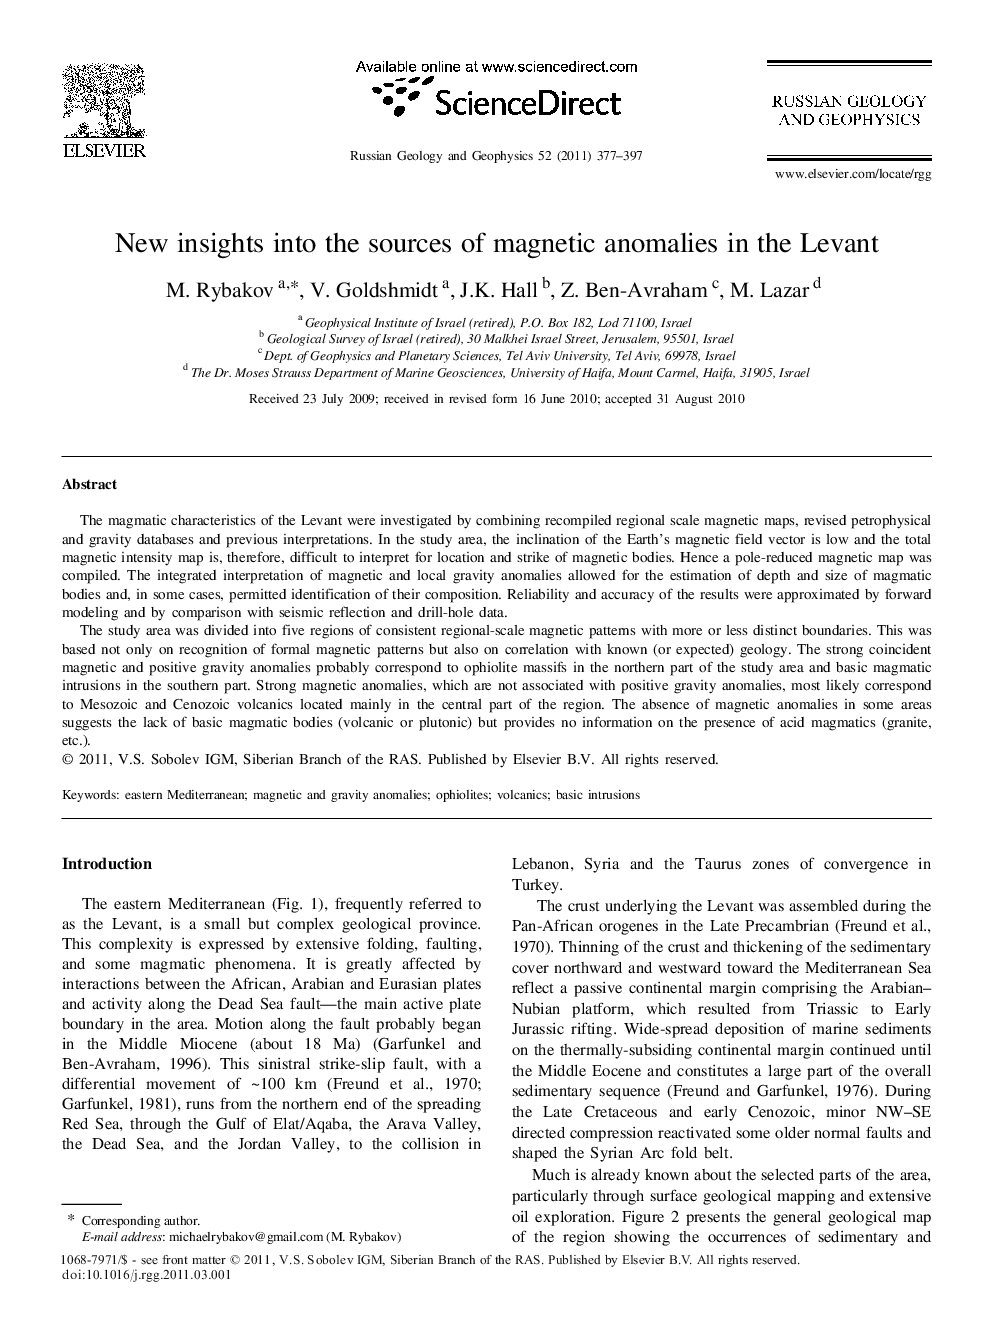 New insights into the sources of magnetic anomalies in the Levant